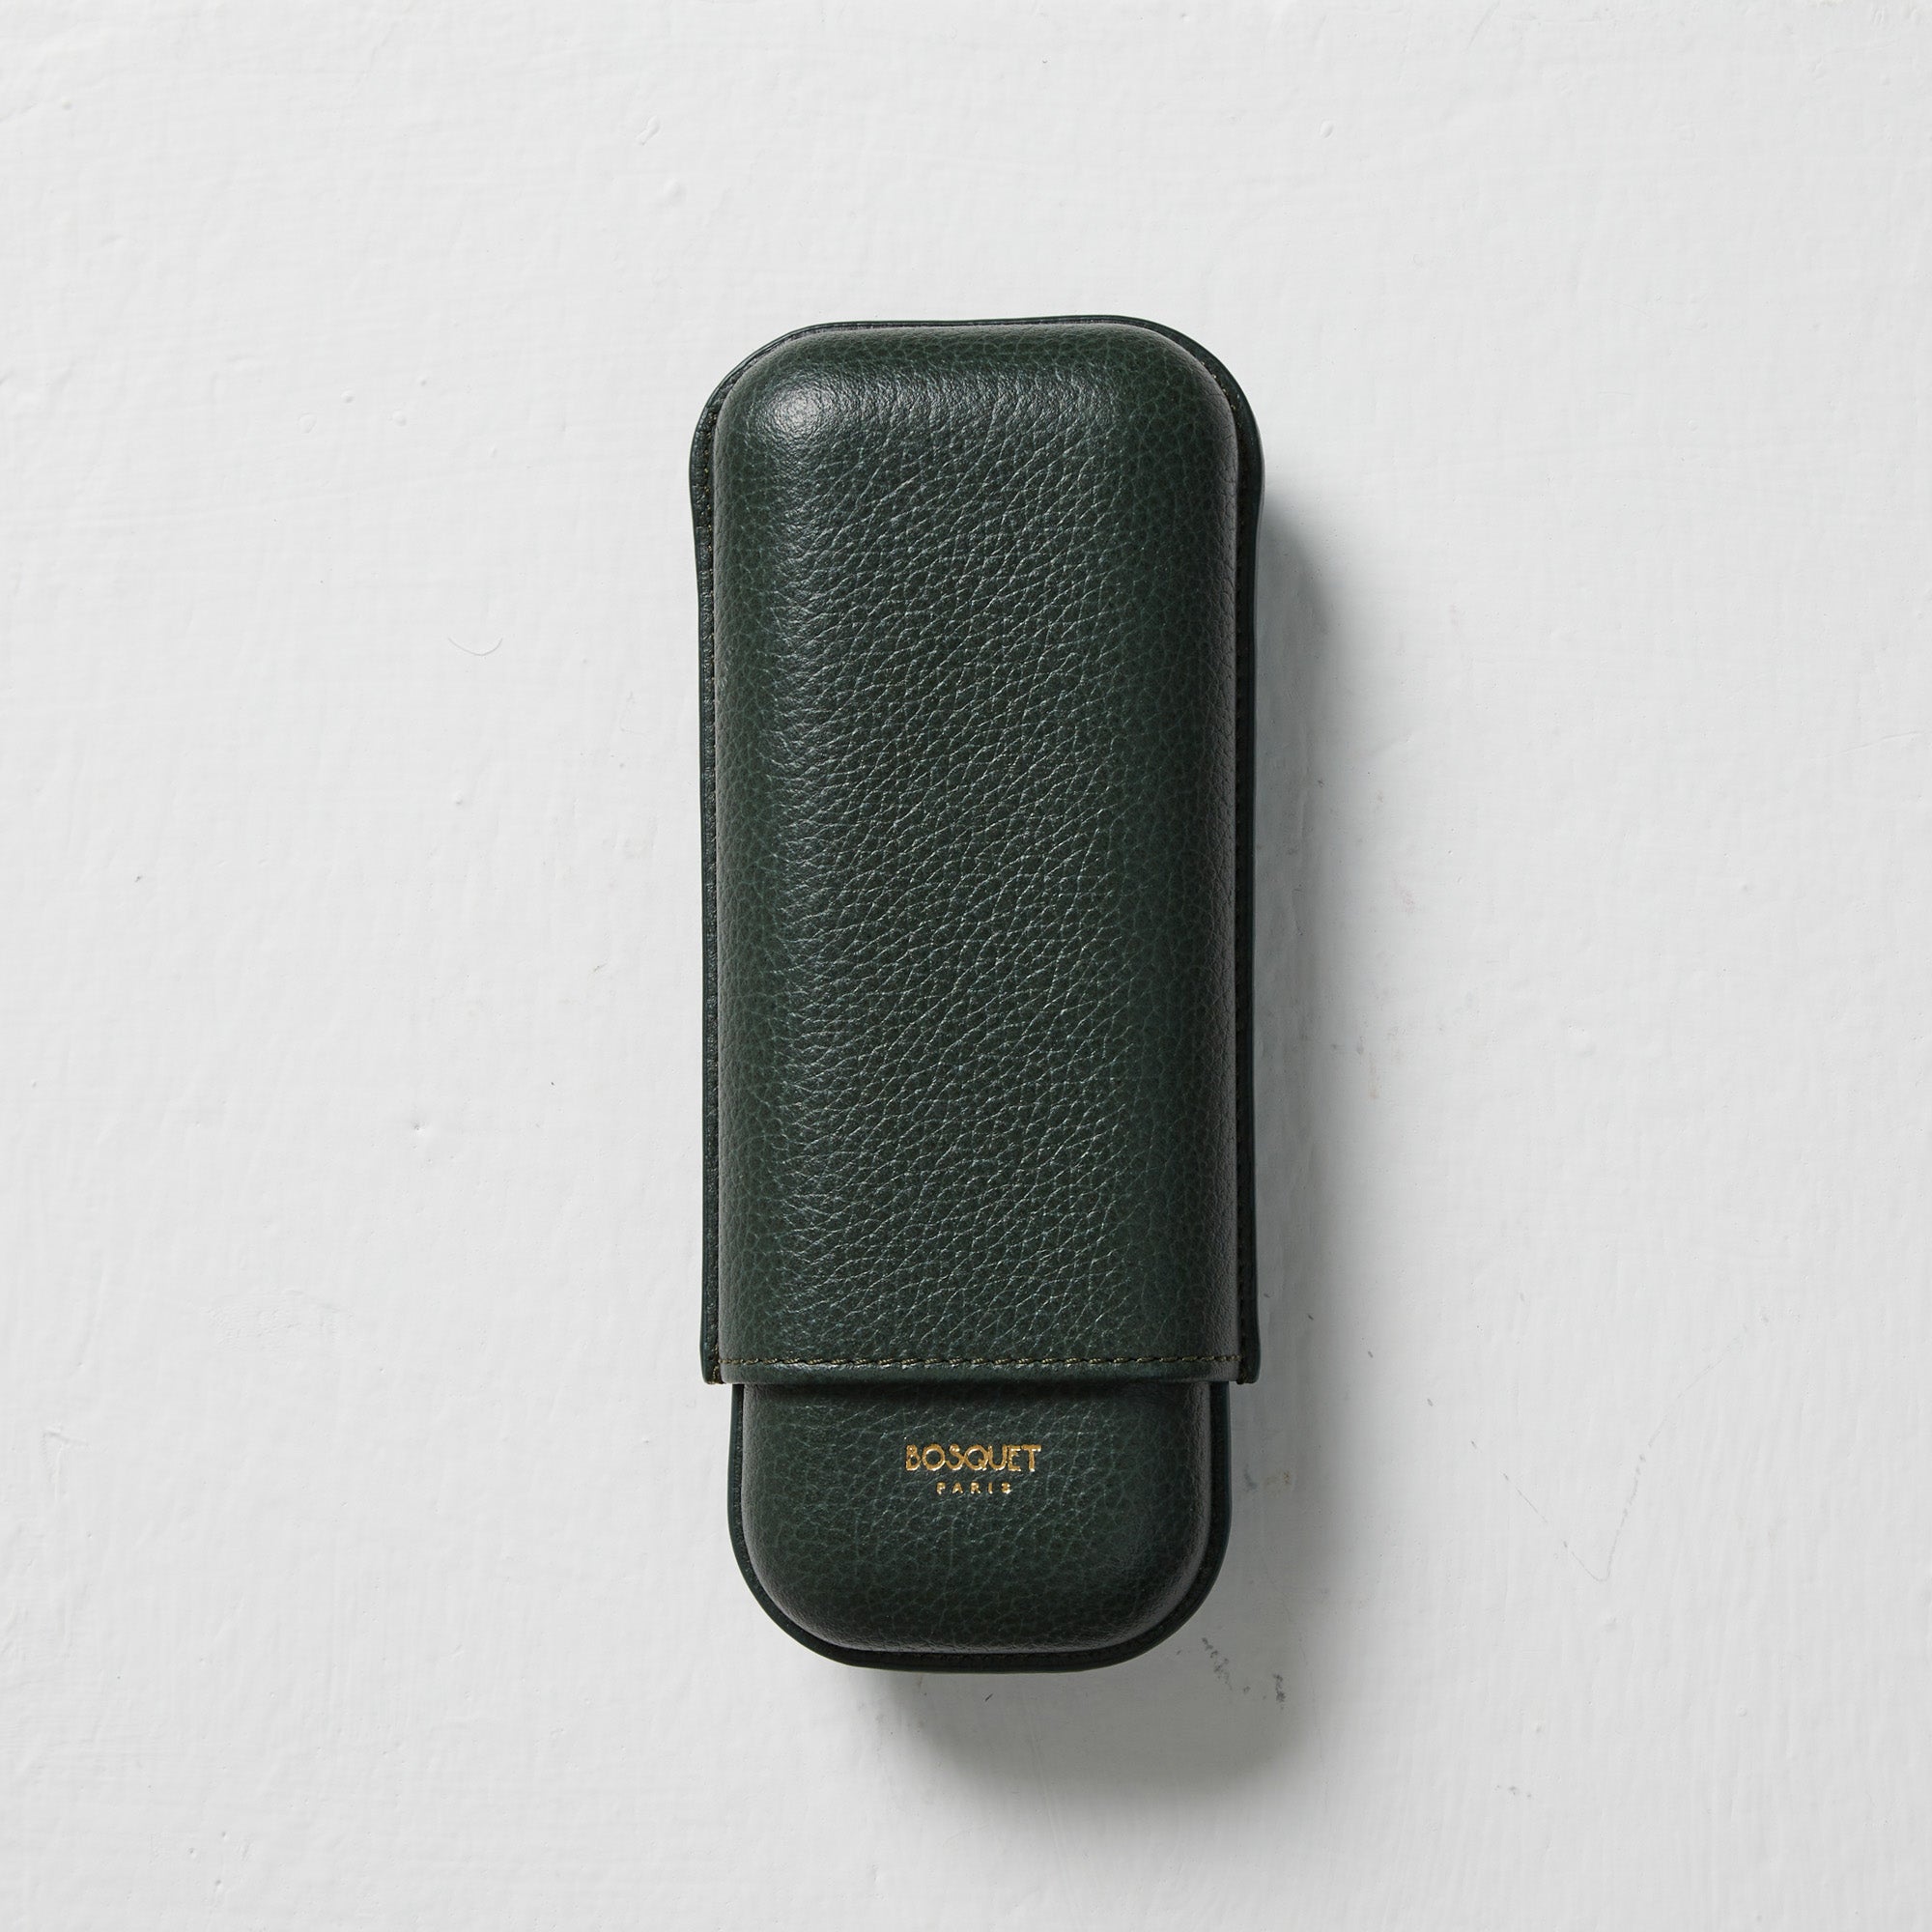 A Bosque Smooth Forest Green Leather Cigar Case for transporting cigars on a white surface.